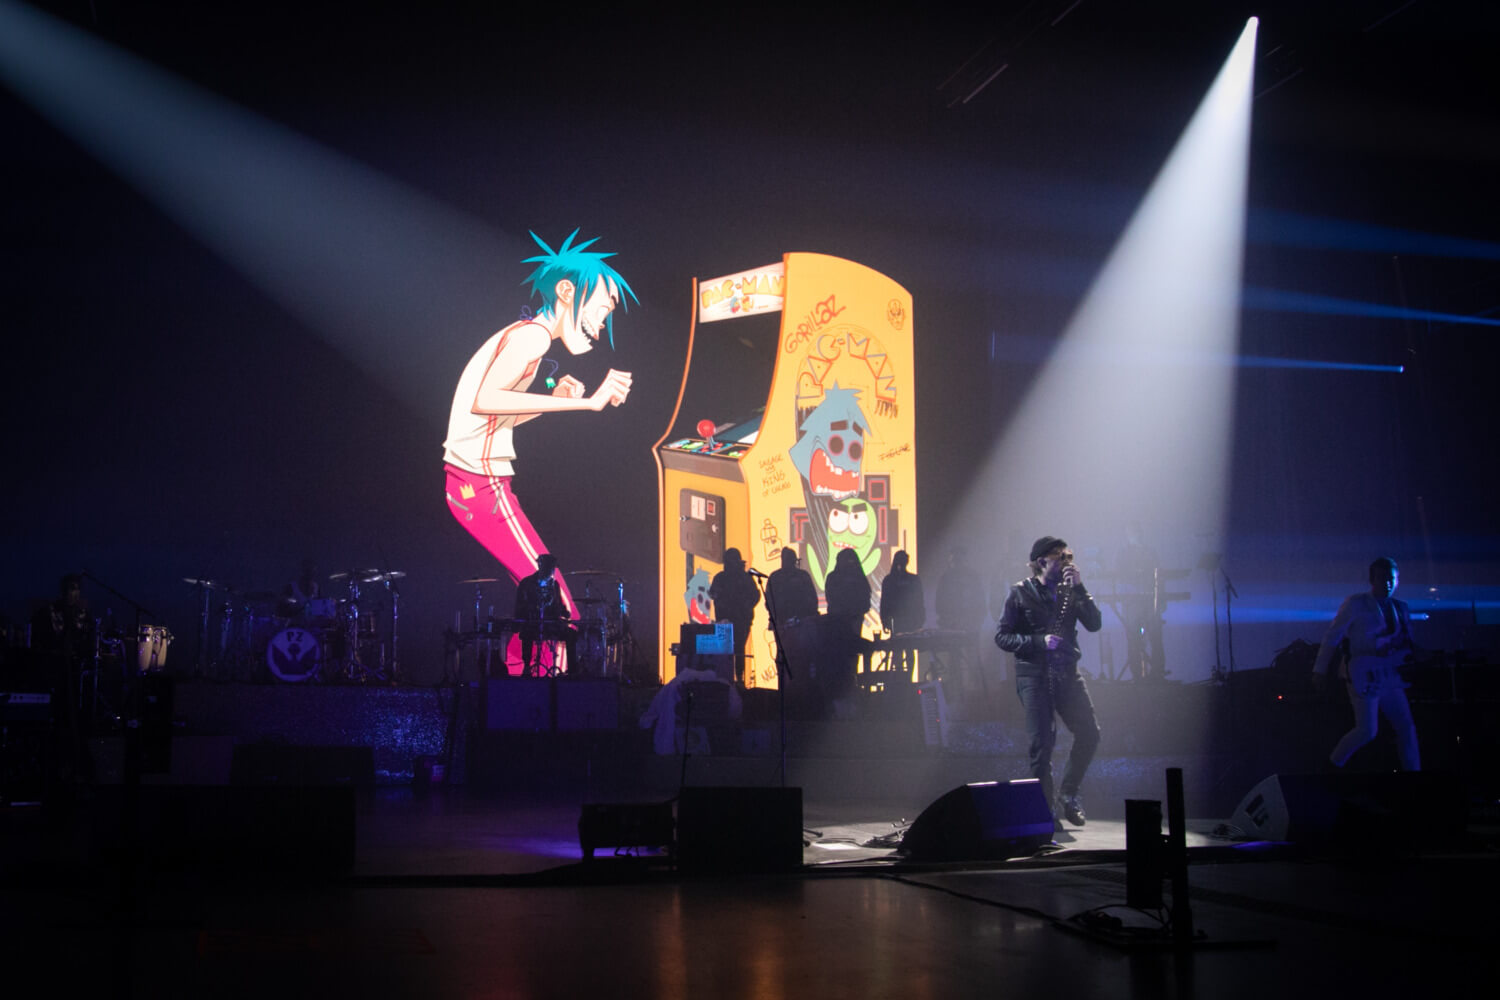 『Gorillaz: Song Machine Live From Kong』場面写真